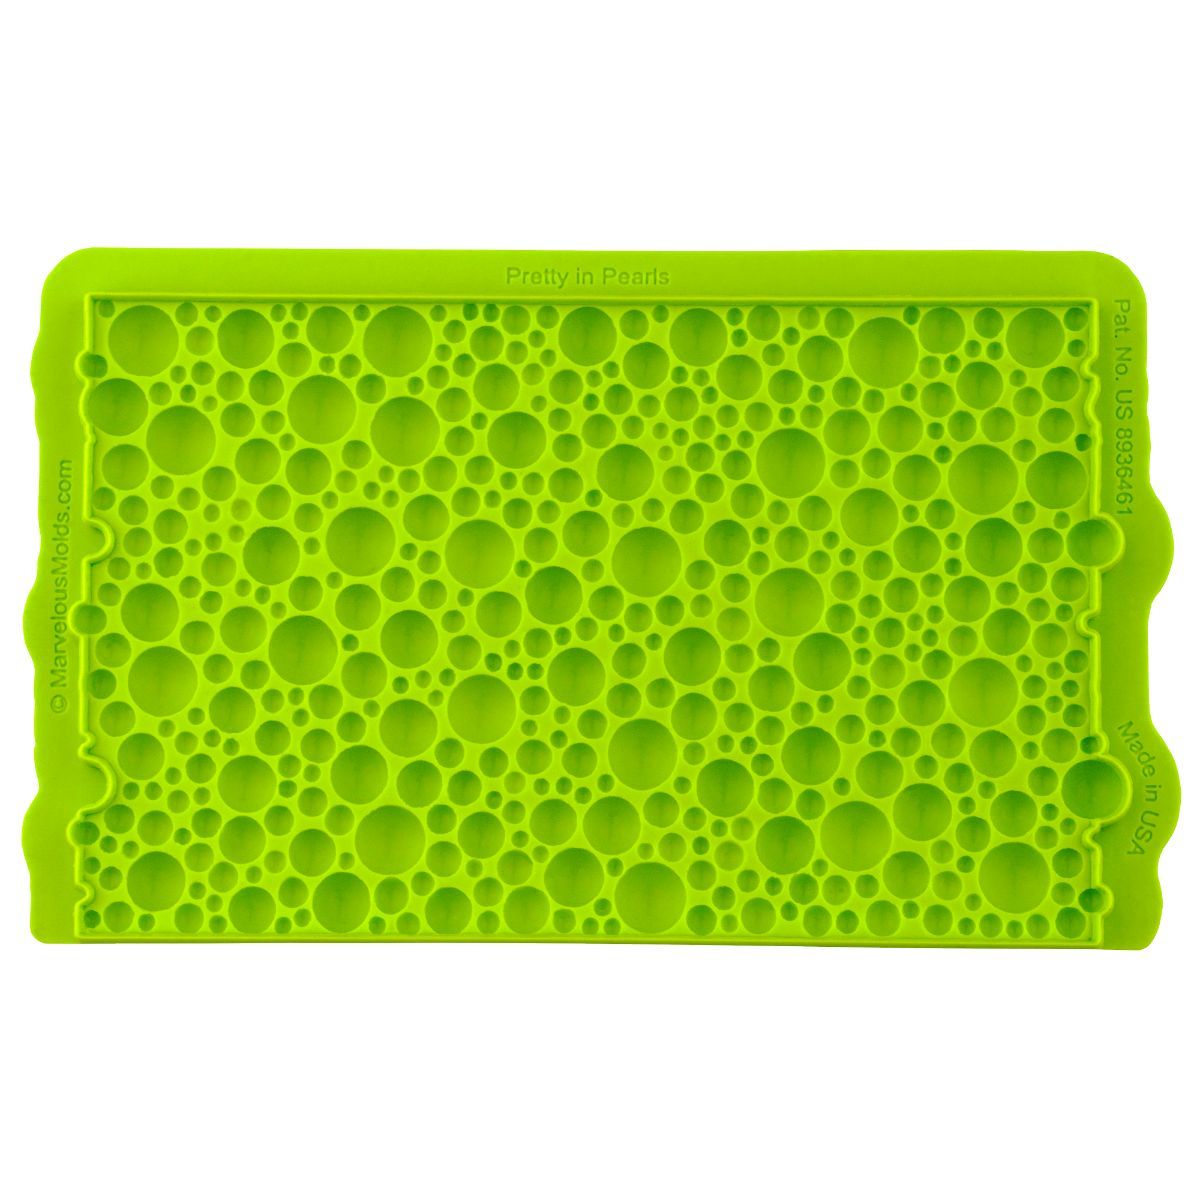 Pretty in Pearls Marvelous Molds Silicone Mold - Bake Supply Plus